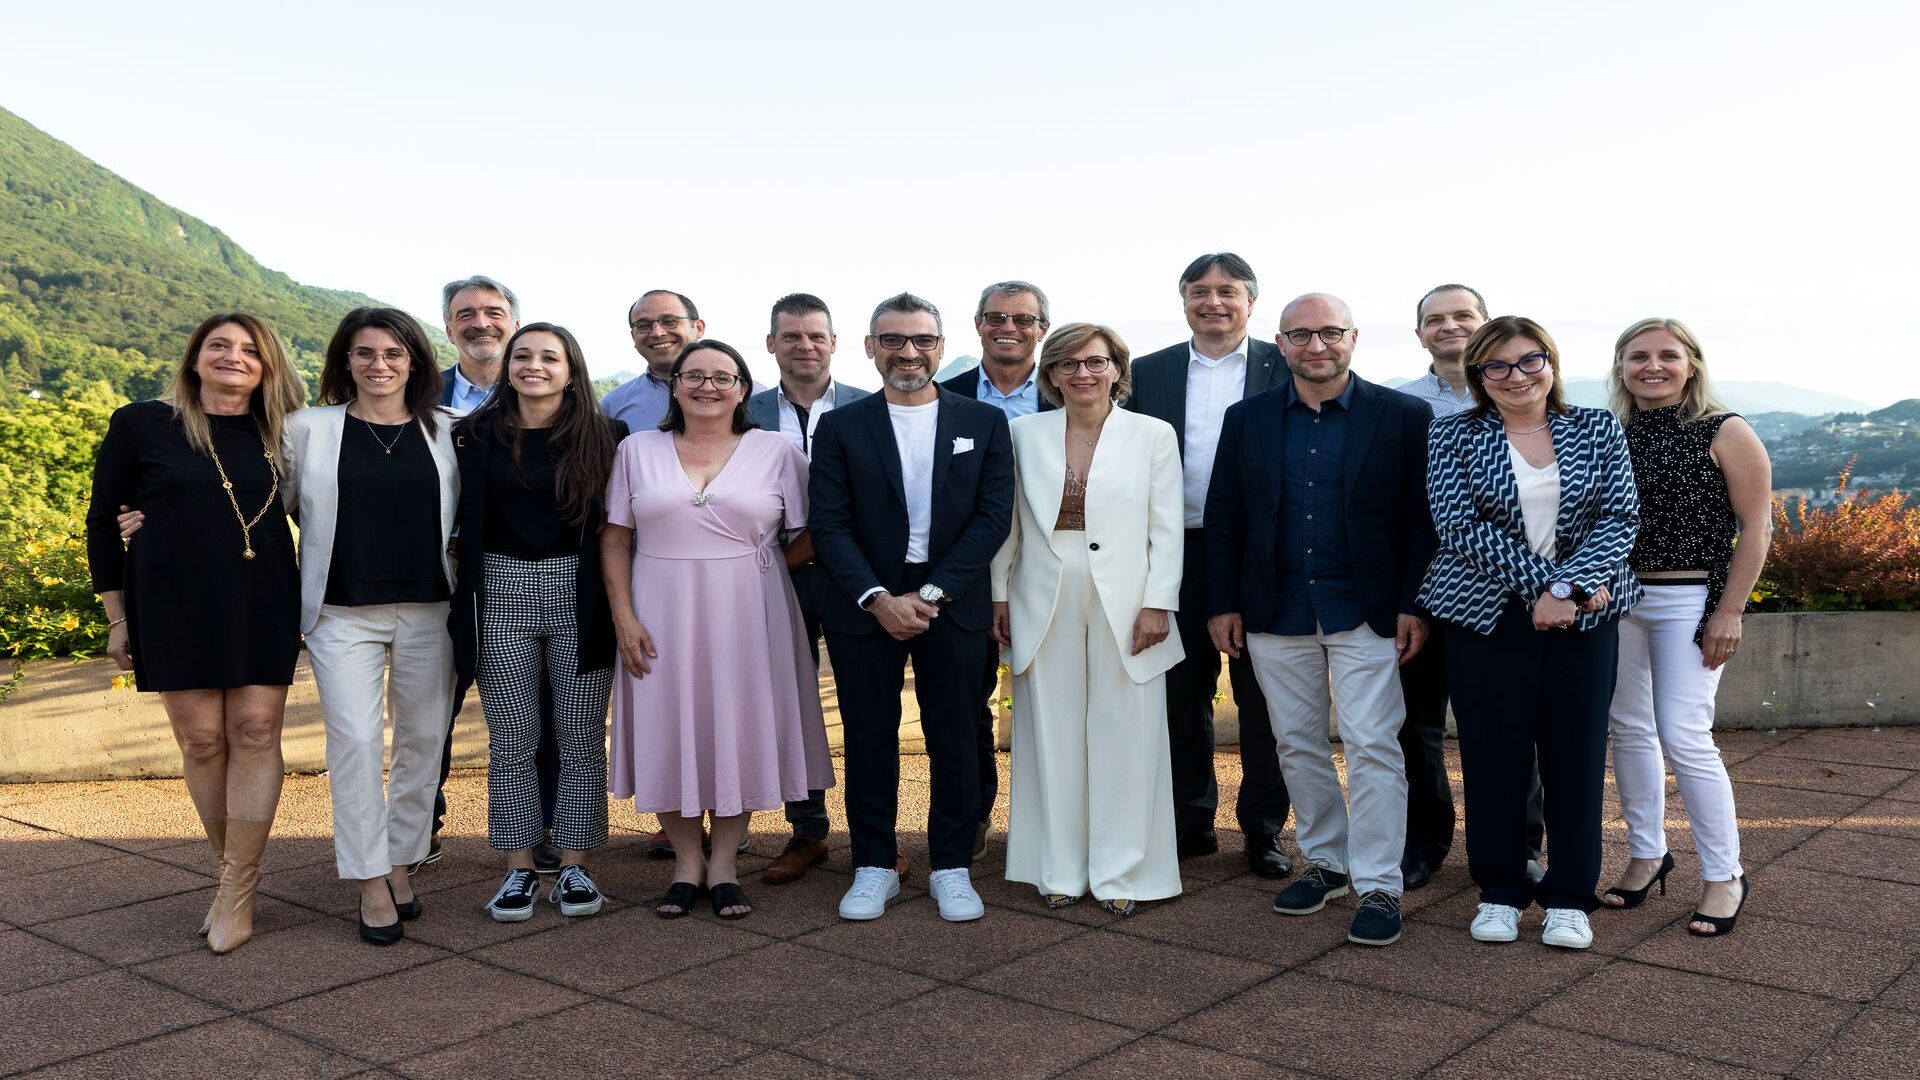 The members of the Committee and the working staff of the ated-ICT Ticino association, led by the new president Cristina Giotto